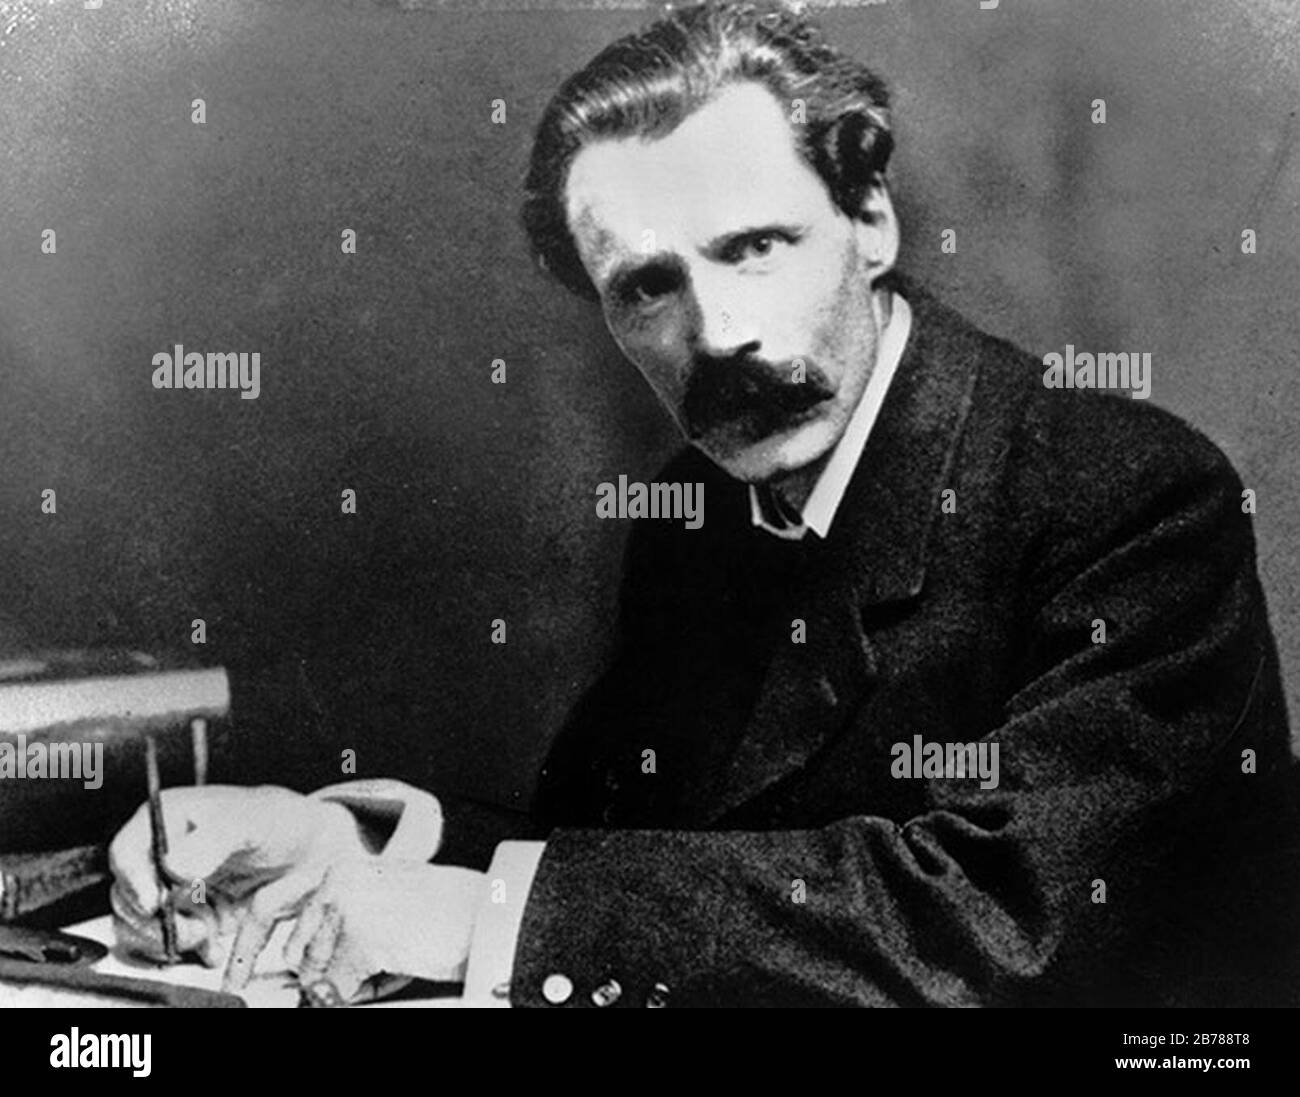 George Gissing c1890s. Stock Photo